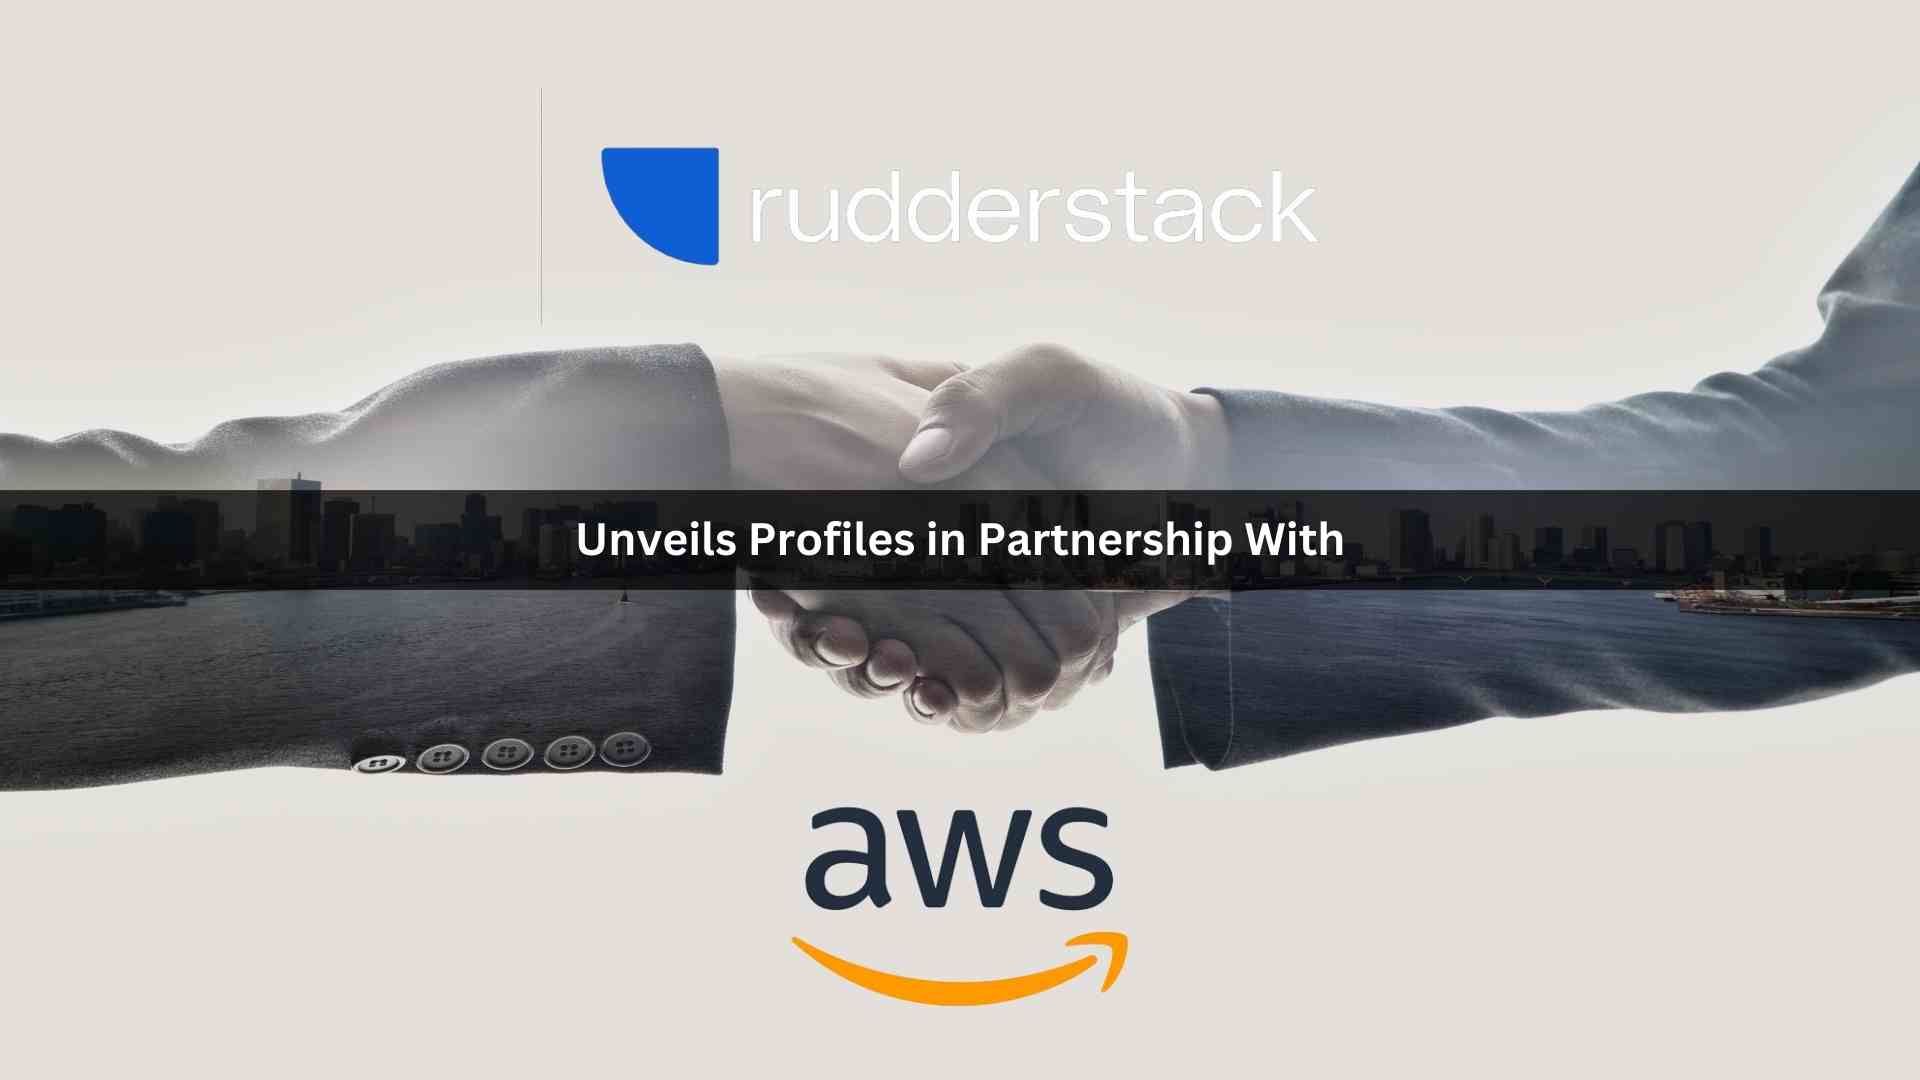 RudderStack unveils Profiles in partnership with AWS, enabling companies to drive better business outcomes with their customer data